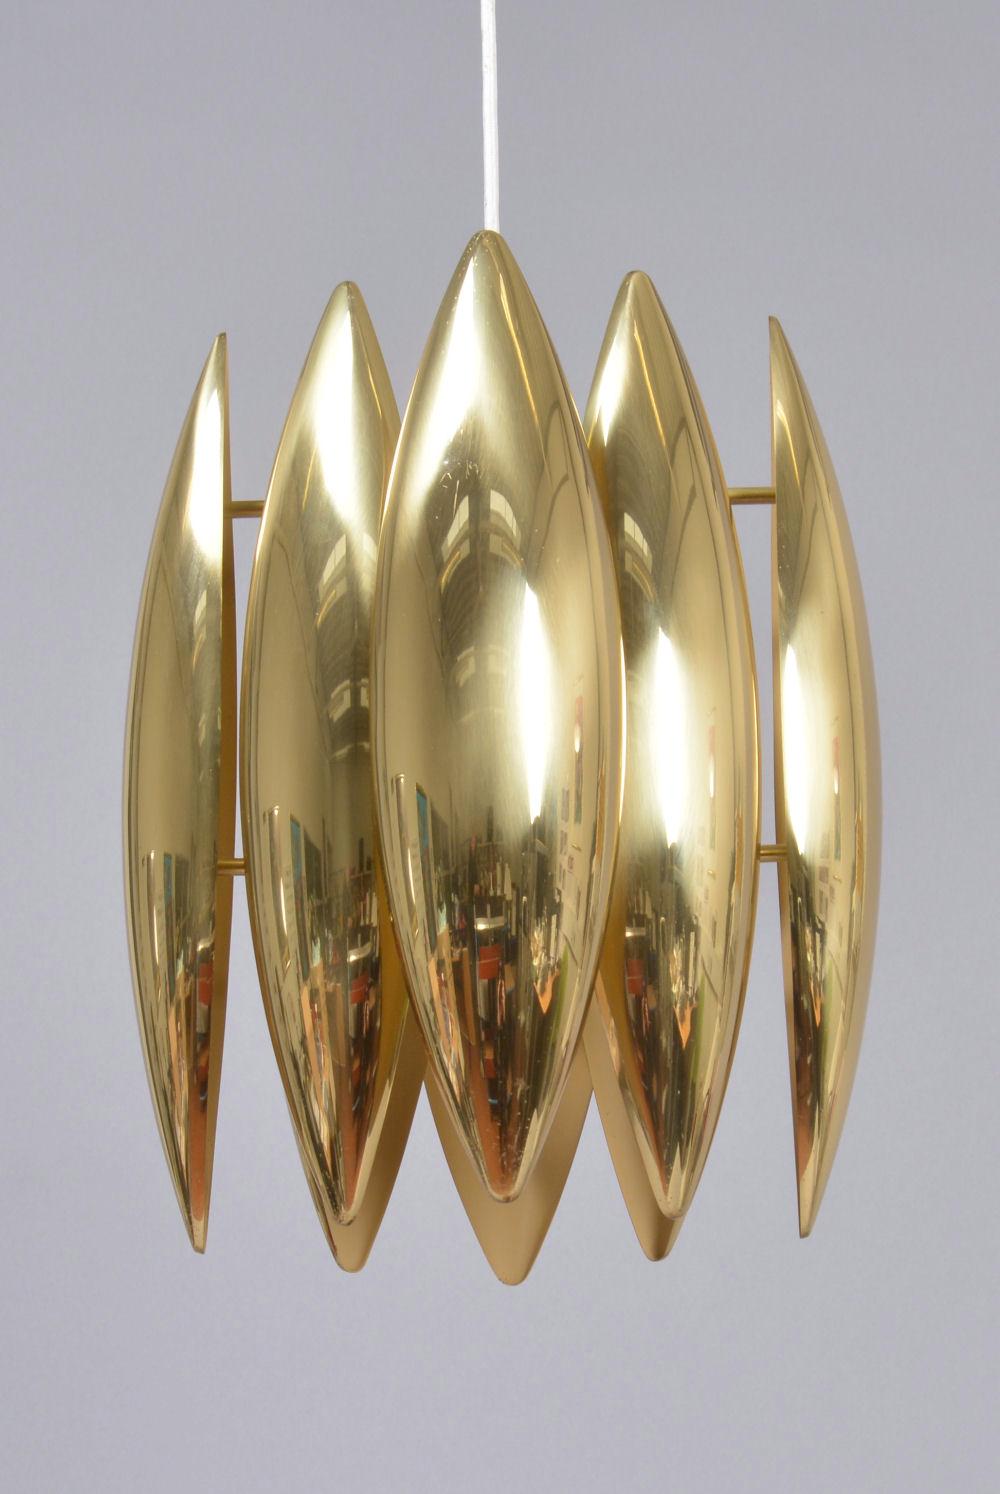 A brass pendant designed by Jo Hammerborg and edited in the 1970s by Fog and Mørup. Excellent original condition.